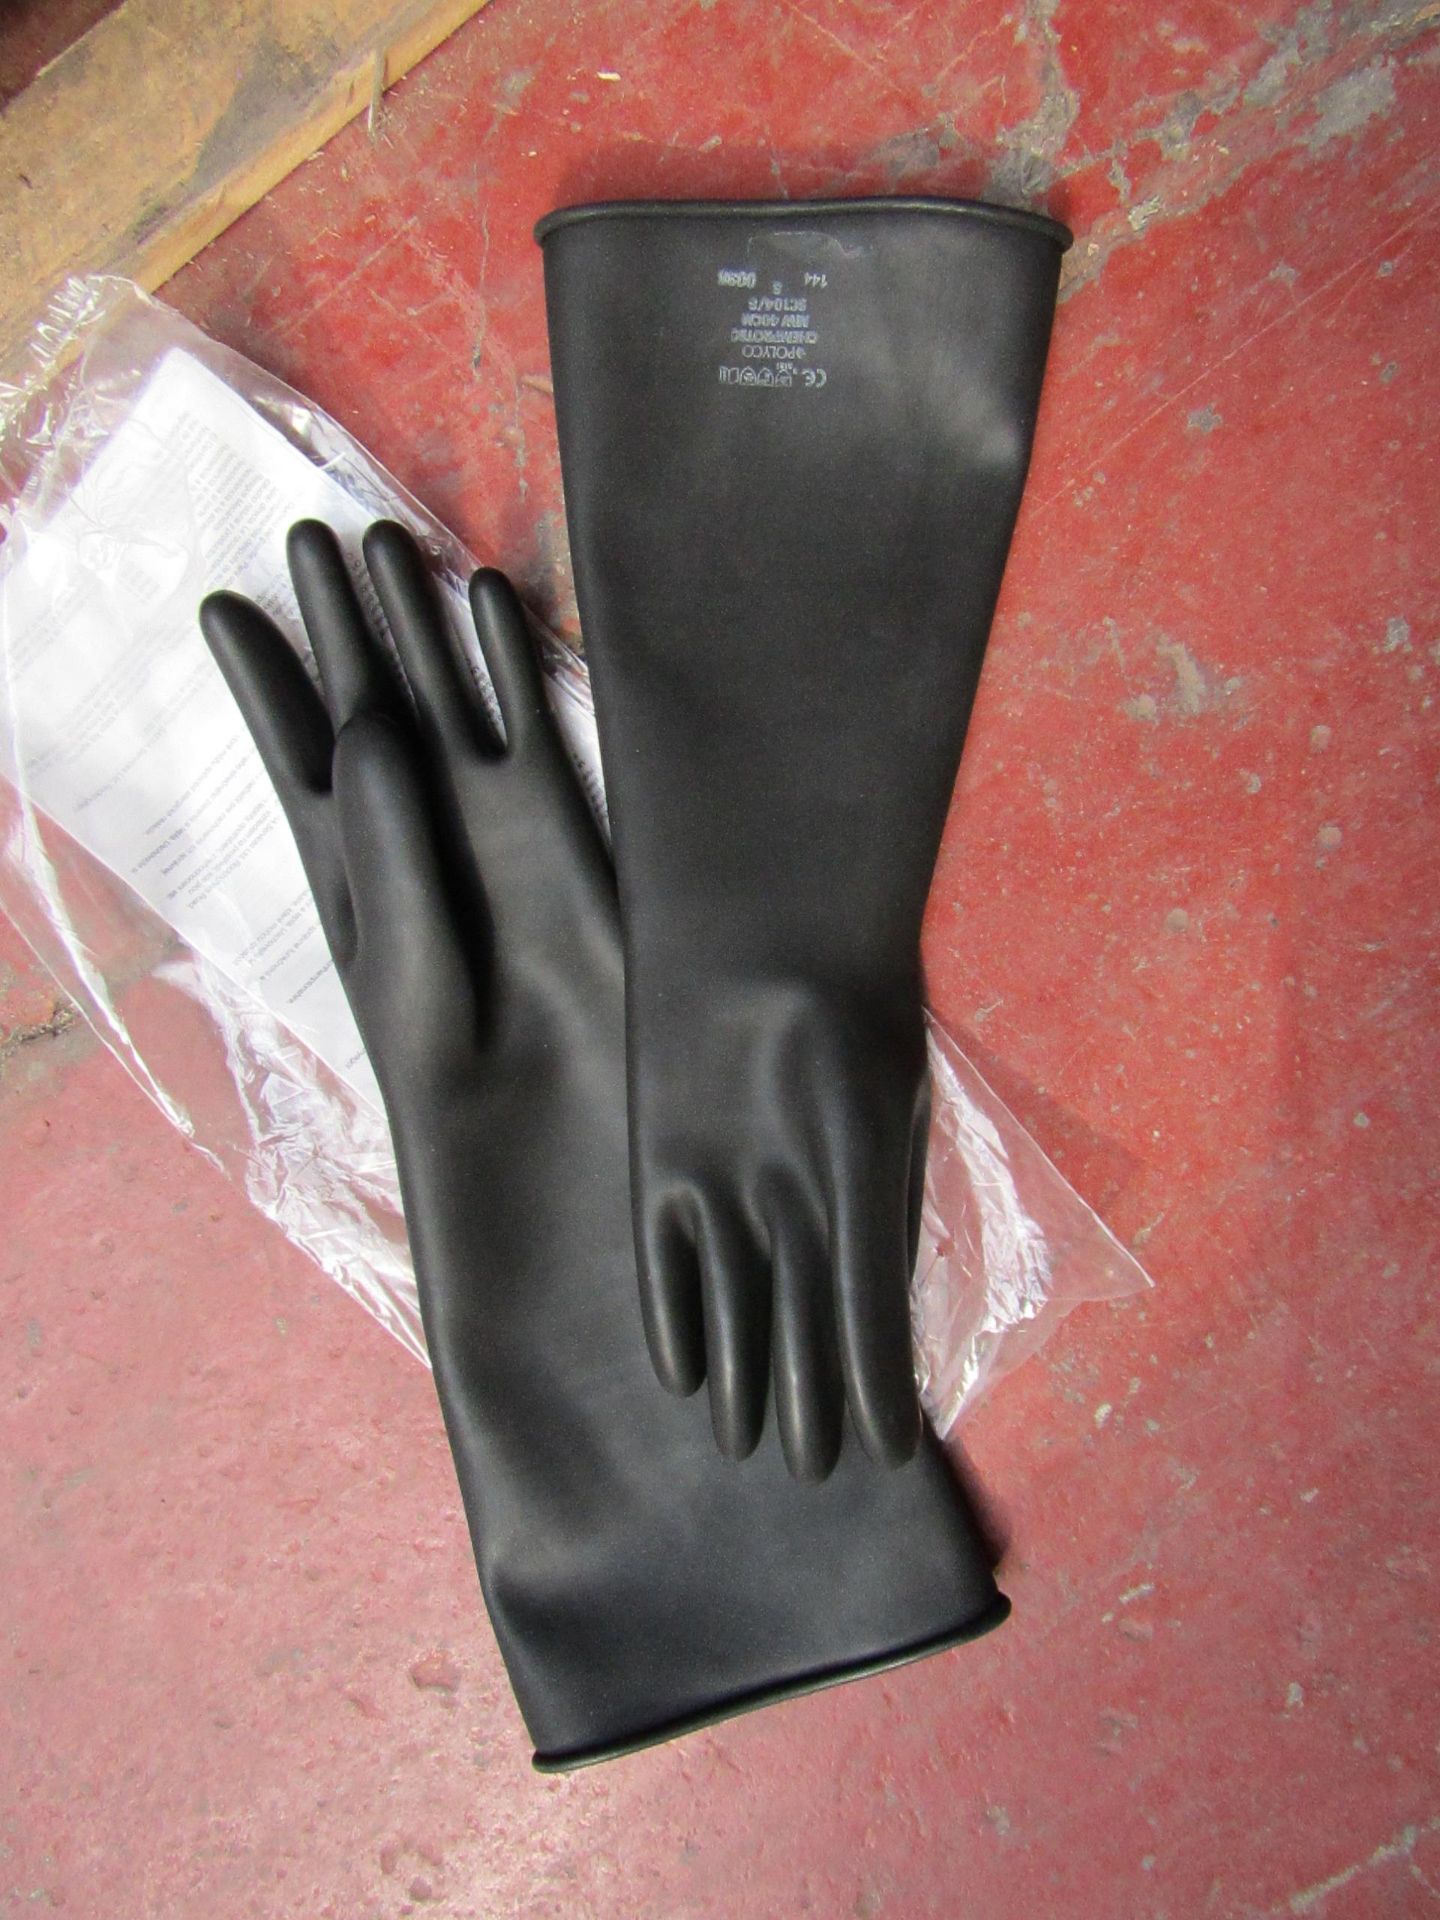 2x Polyco upper arm protection gloves, new and packaged.